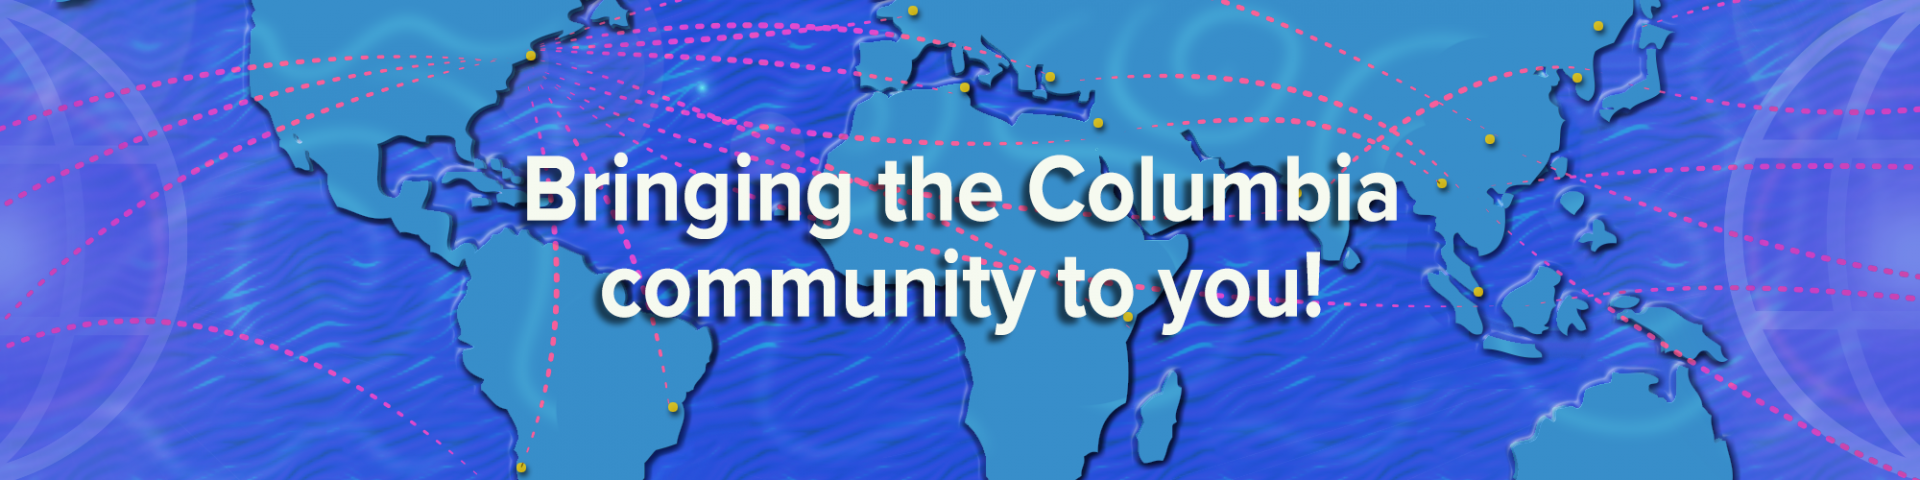 Bringing the Columbia community to you!